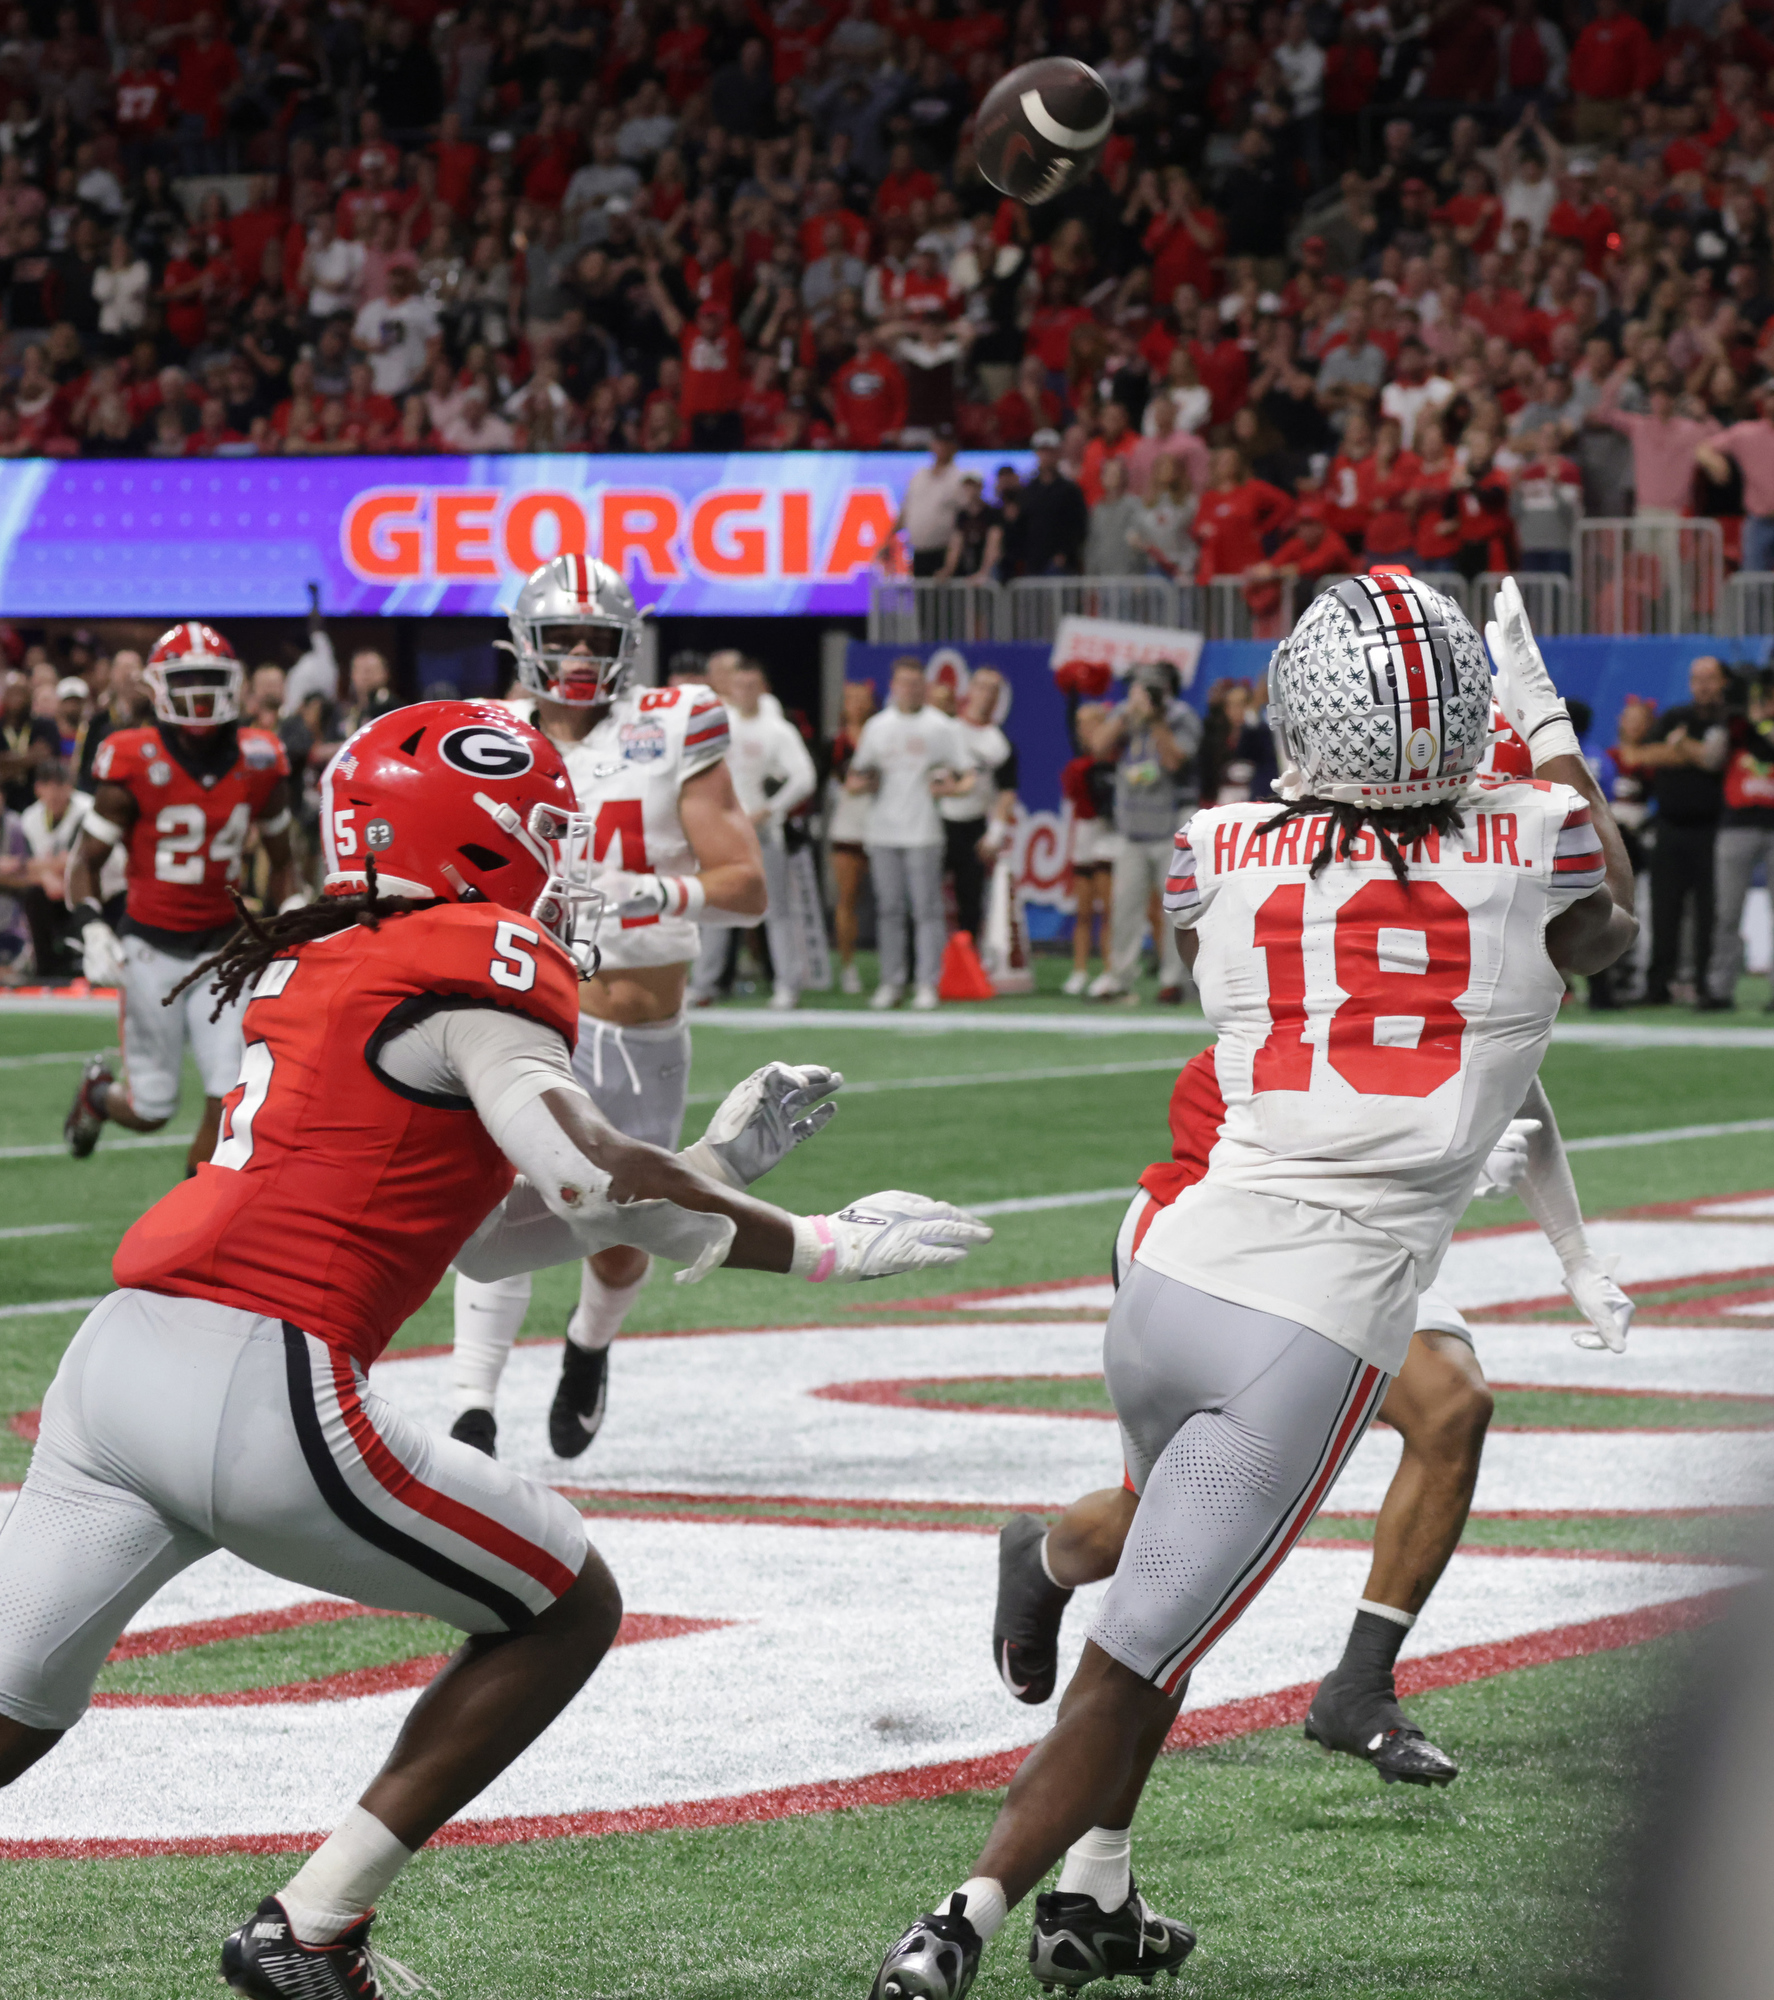 Ohio State football envying Georgia, chasing Michigan and living